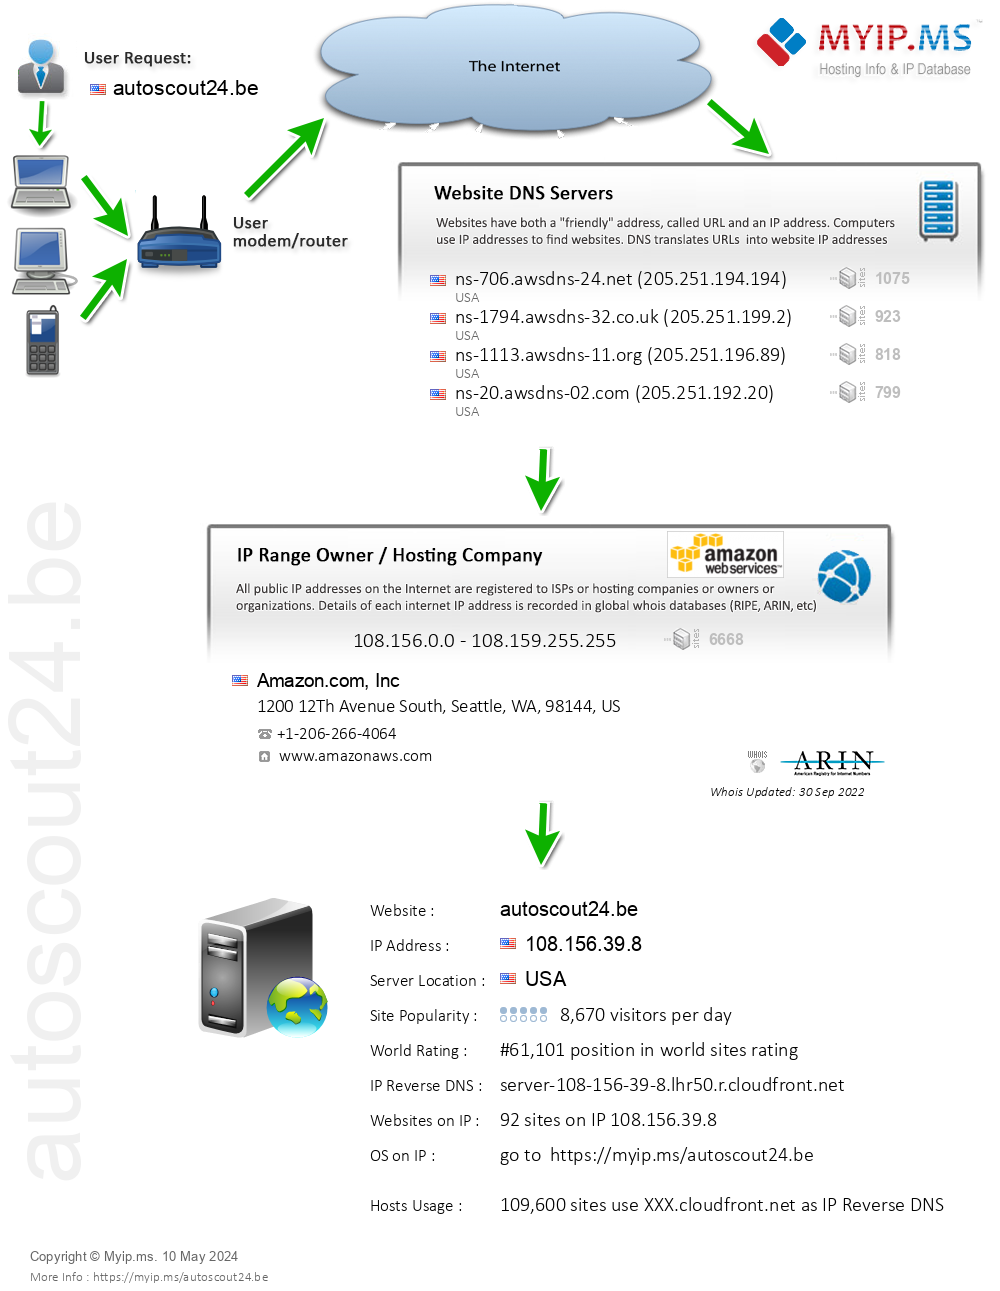 Autoscout24.be - Website Hosting Visual IP Diagram